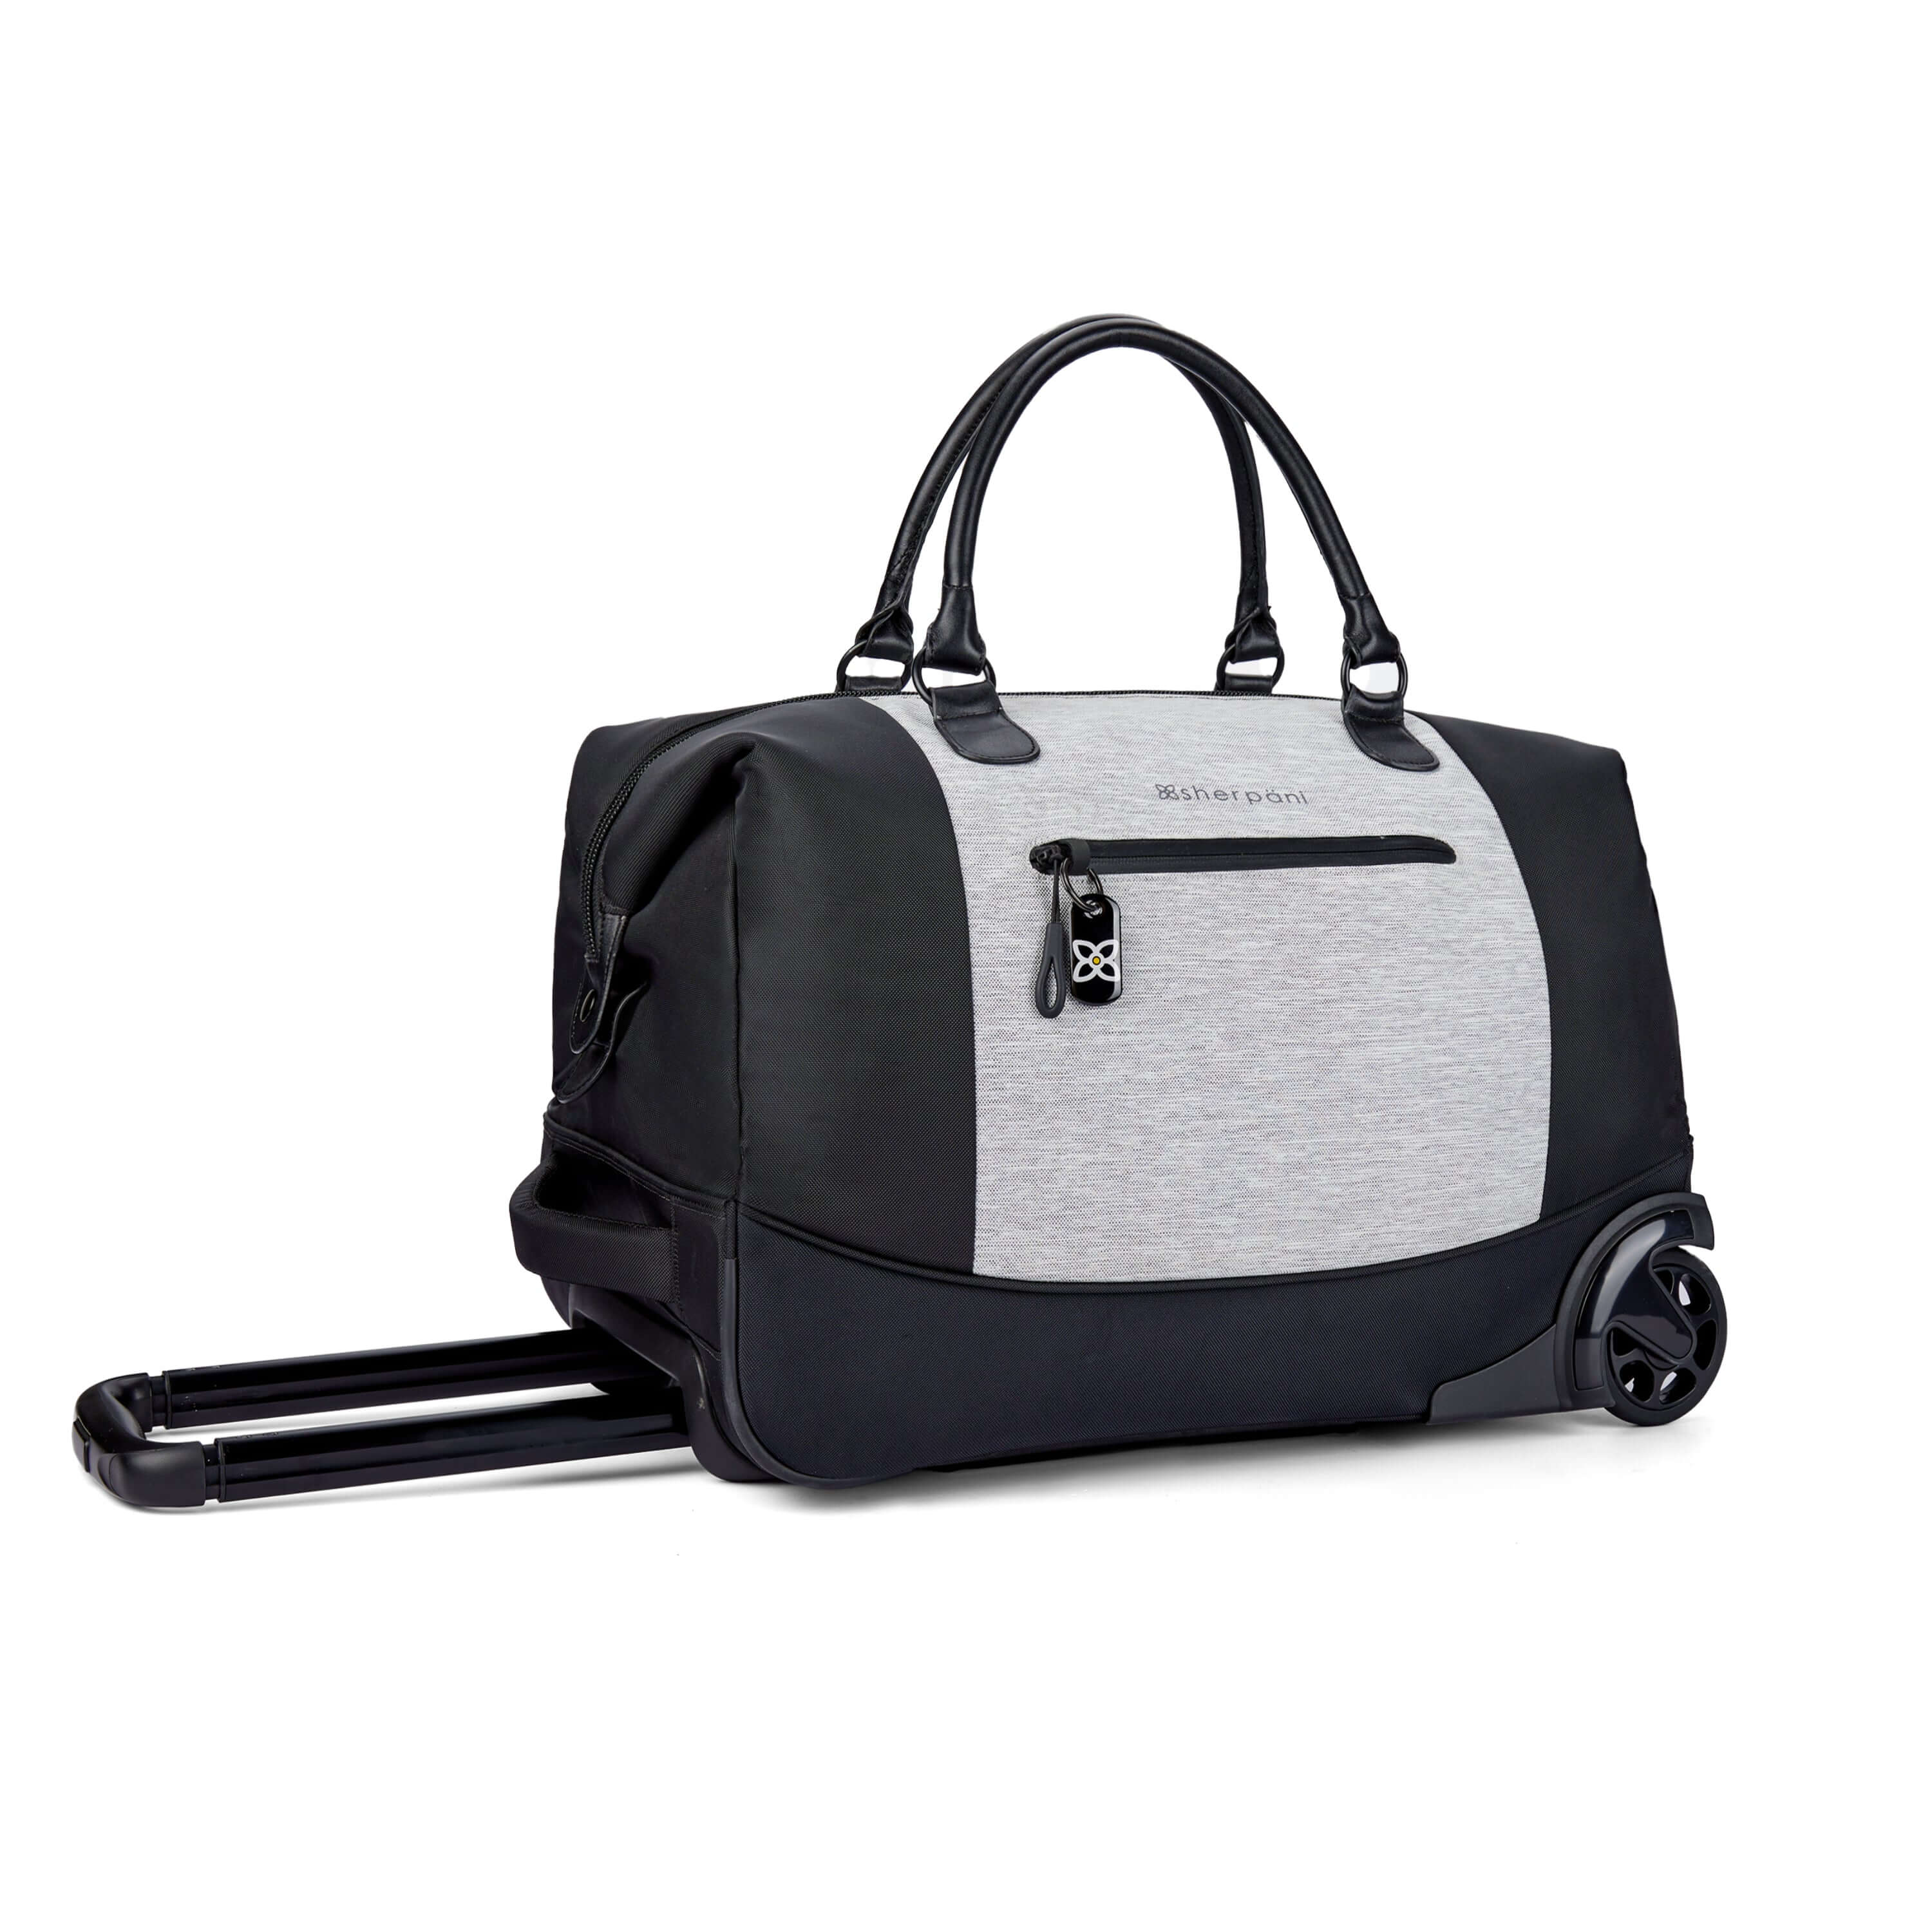 Angled front view of Sherpani’s Anti Theft rolling Duffle, the Trip in Sterling, with vegan leather accents in black. The bag lies flat on the ground with the luggage handle extended on the left side and the rolling wheels shown on the right side. The bag features short tote handles at the top and an external zipper compartment on the front panel with locking zipper and ReturnMe tag.